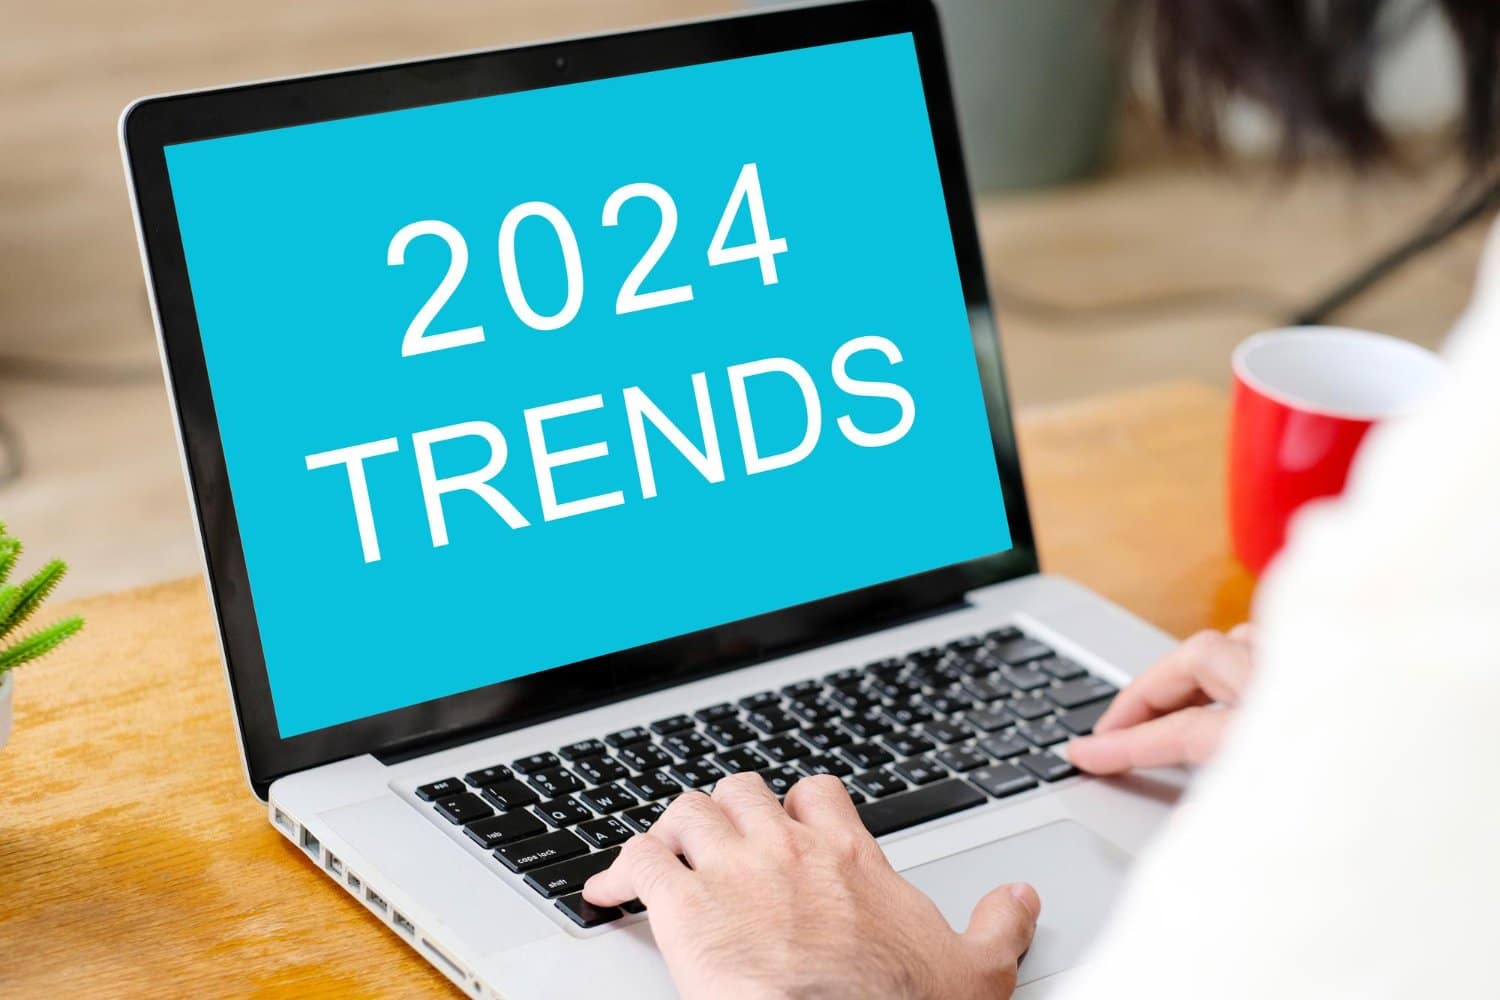 You are currently viewing Trends in Website Design for 2024